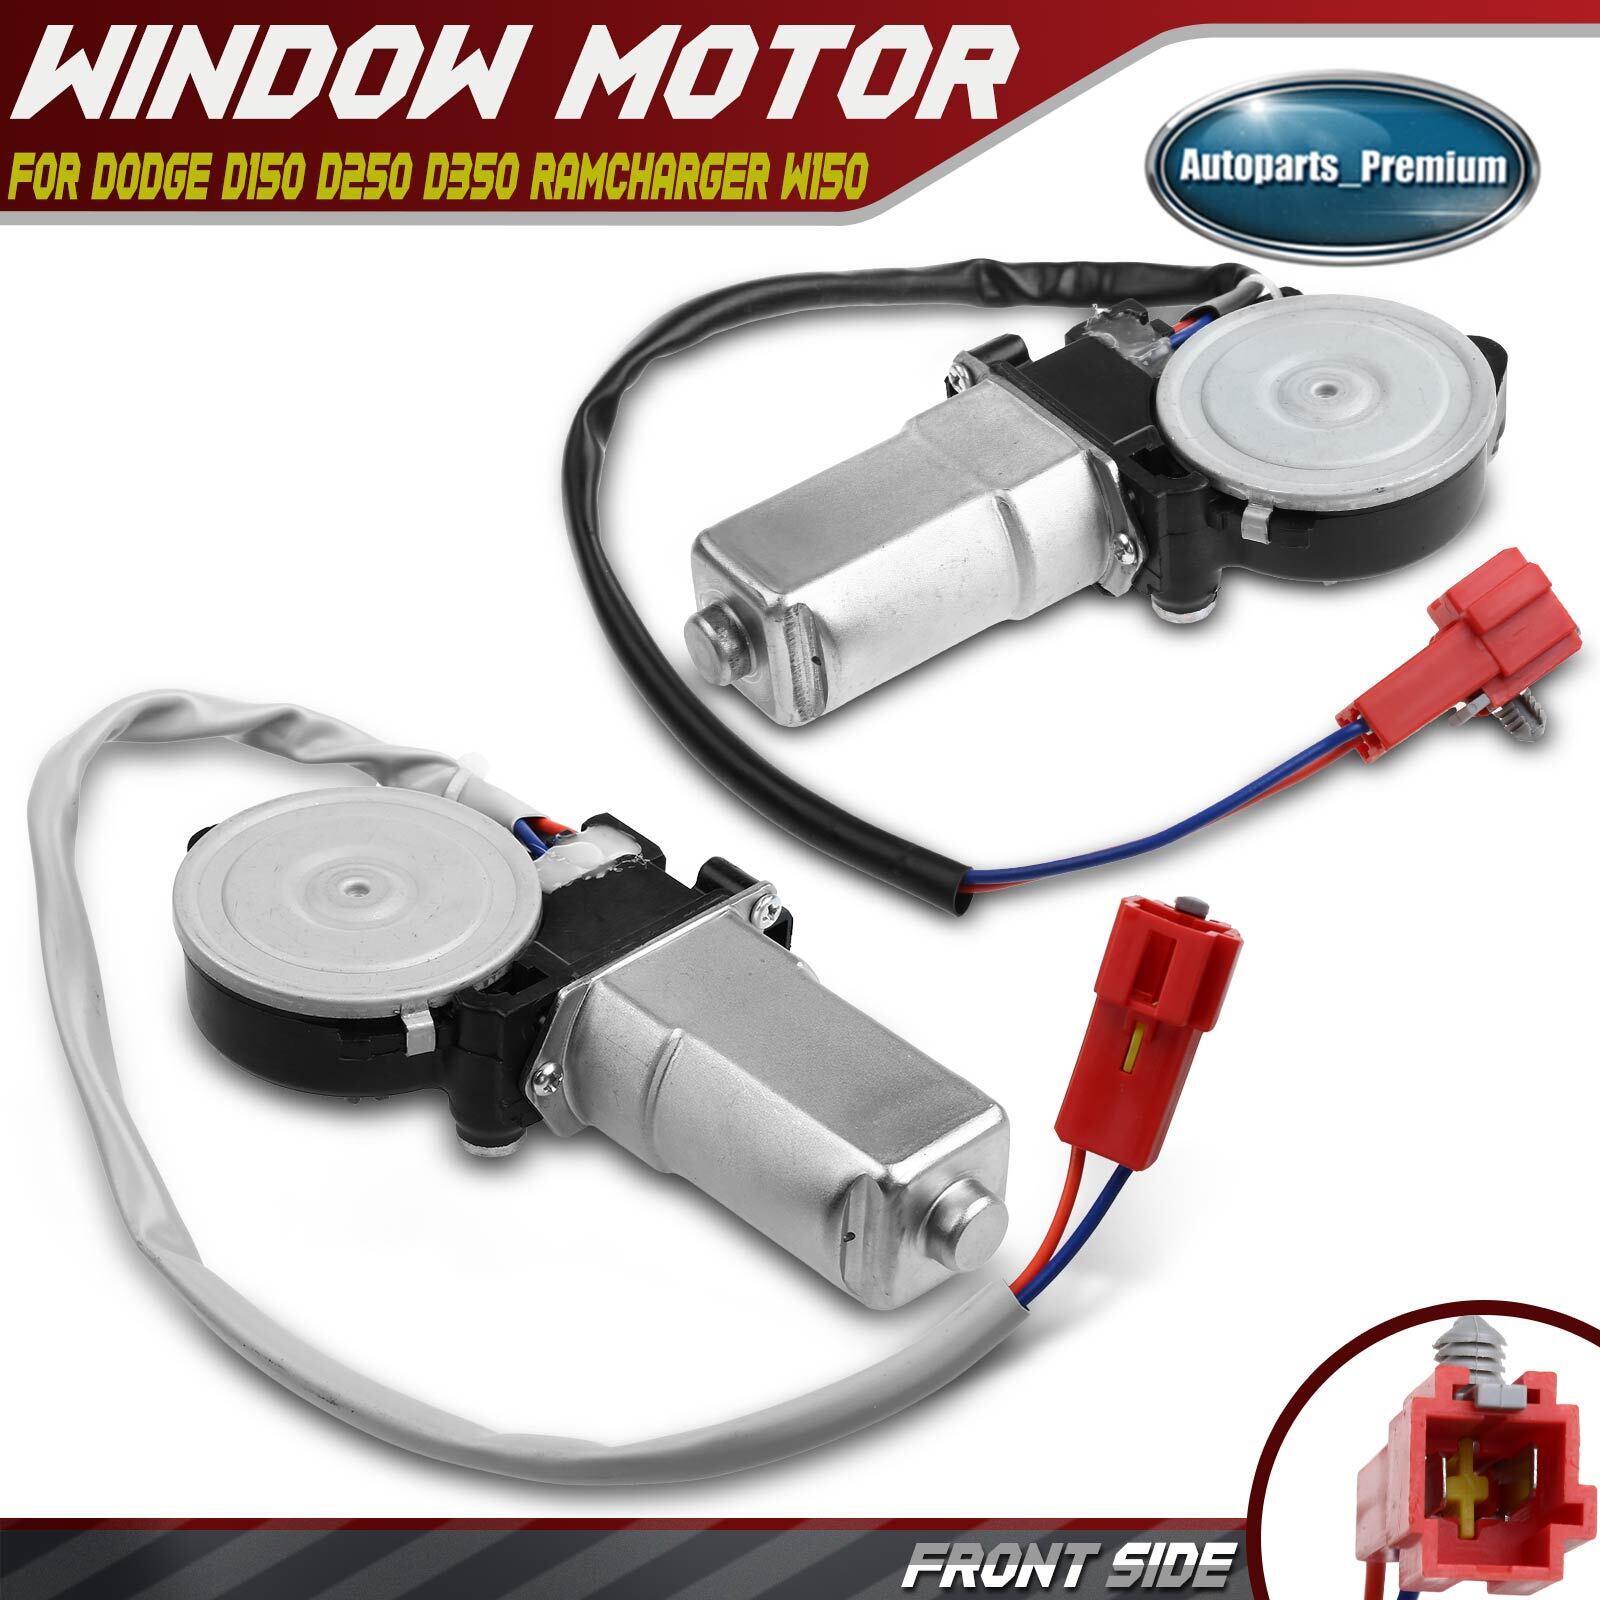 2x Front Power Window Motor for Dodge D150 D250 D350 Ramcharger W150 W250 90-93